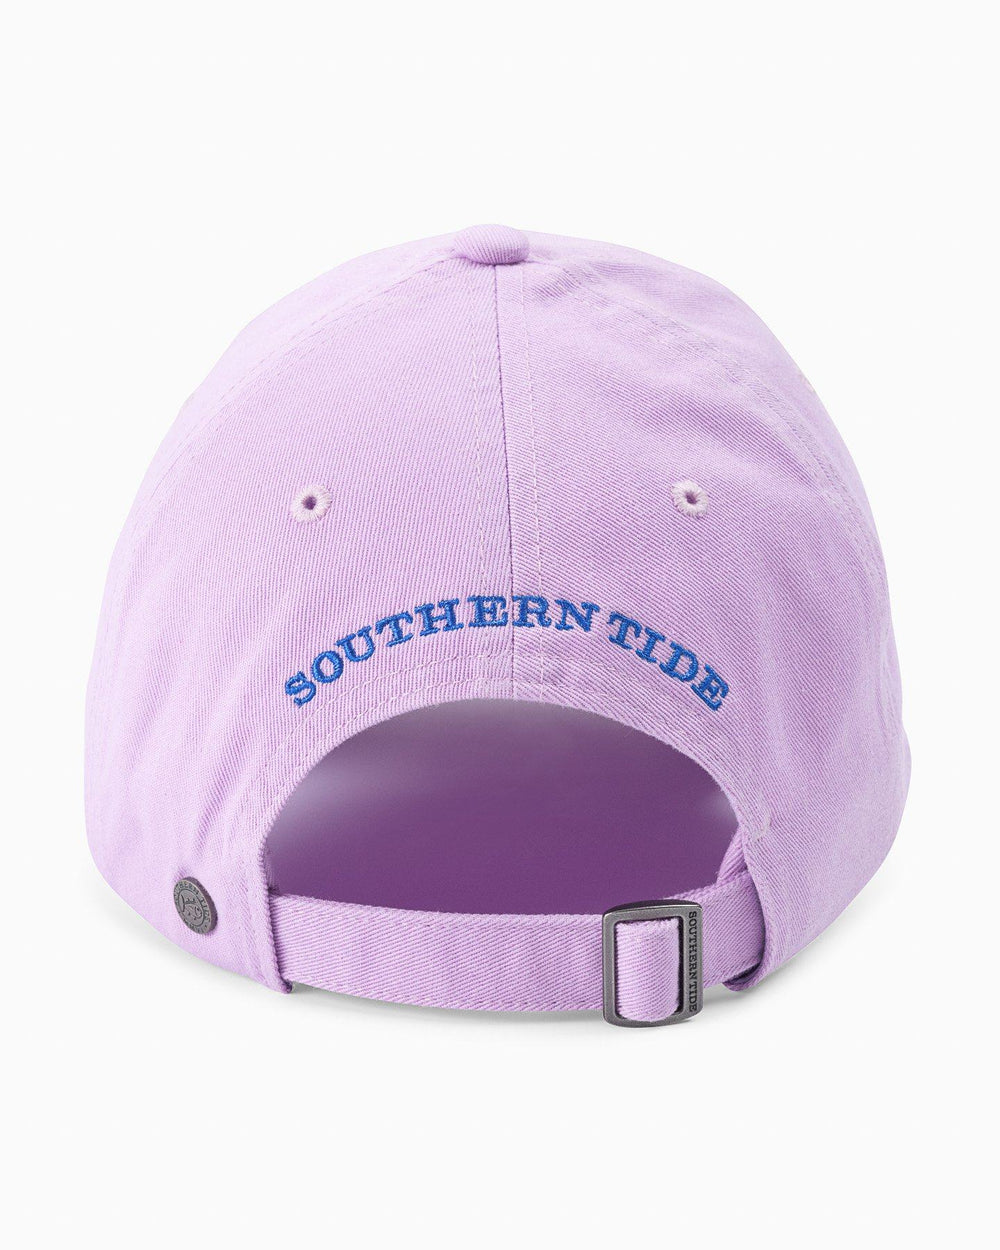 The back of the Skipjack Hat by Southern Tide - Heliotrope